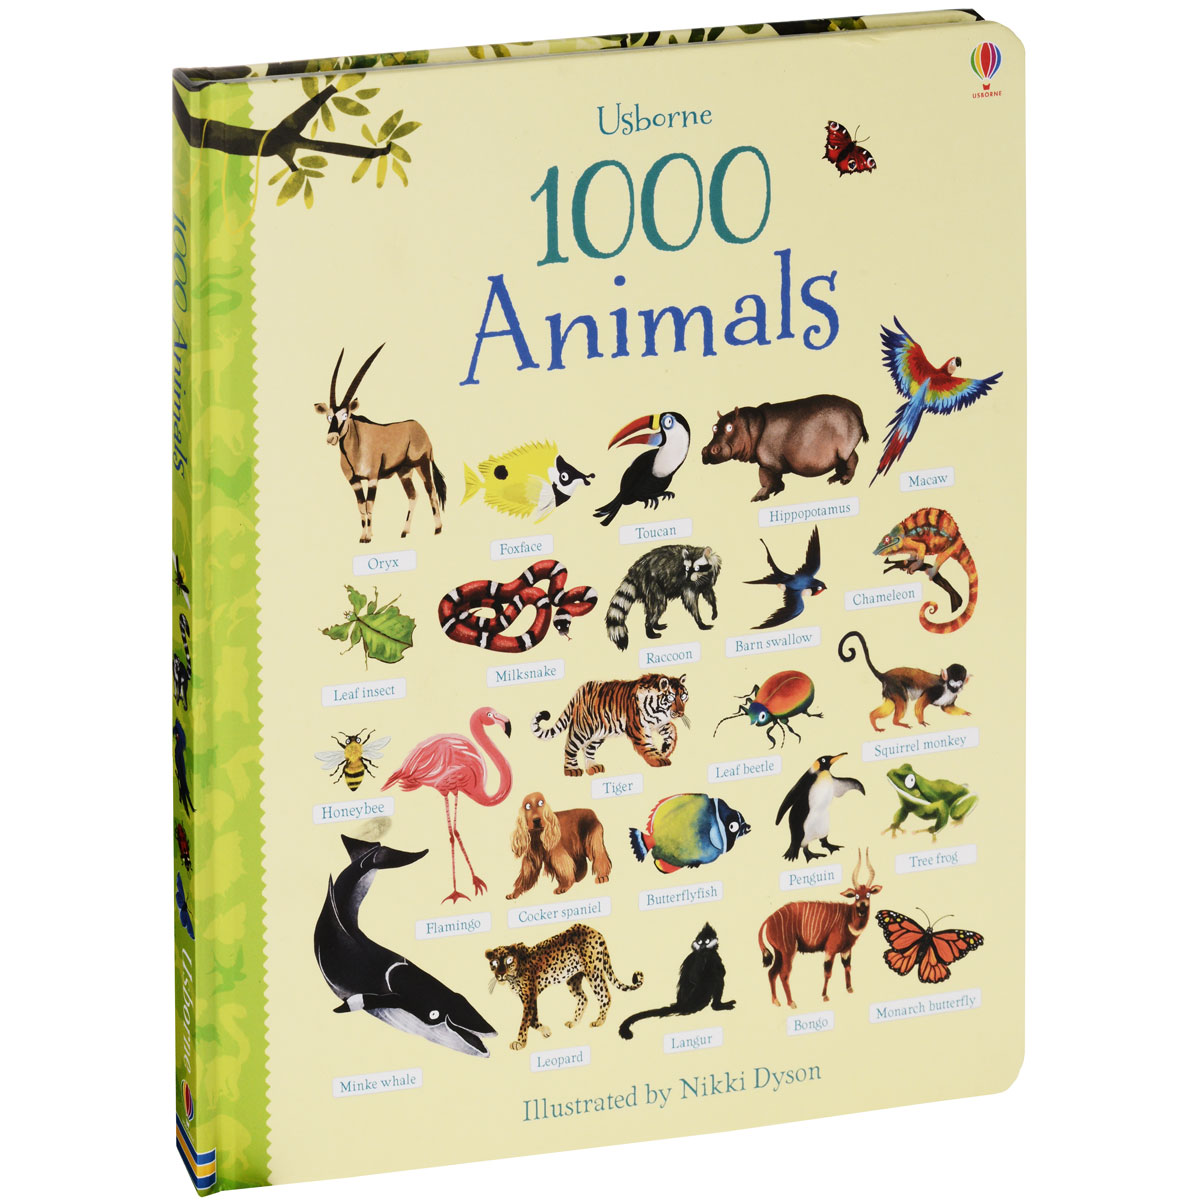 1000 Animals - Jessica Greenwell12296407This large board book contains one thousand pictures of animals, with their names. Children need to add lots of words to their spoken vocabularly and this fantastic look-and-talk book will provide them with plenty of opportunities to do so. Each double-page spread shows a wonderful array of birds, fish, mammals, dinosaurs and more.